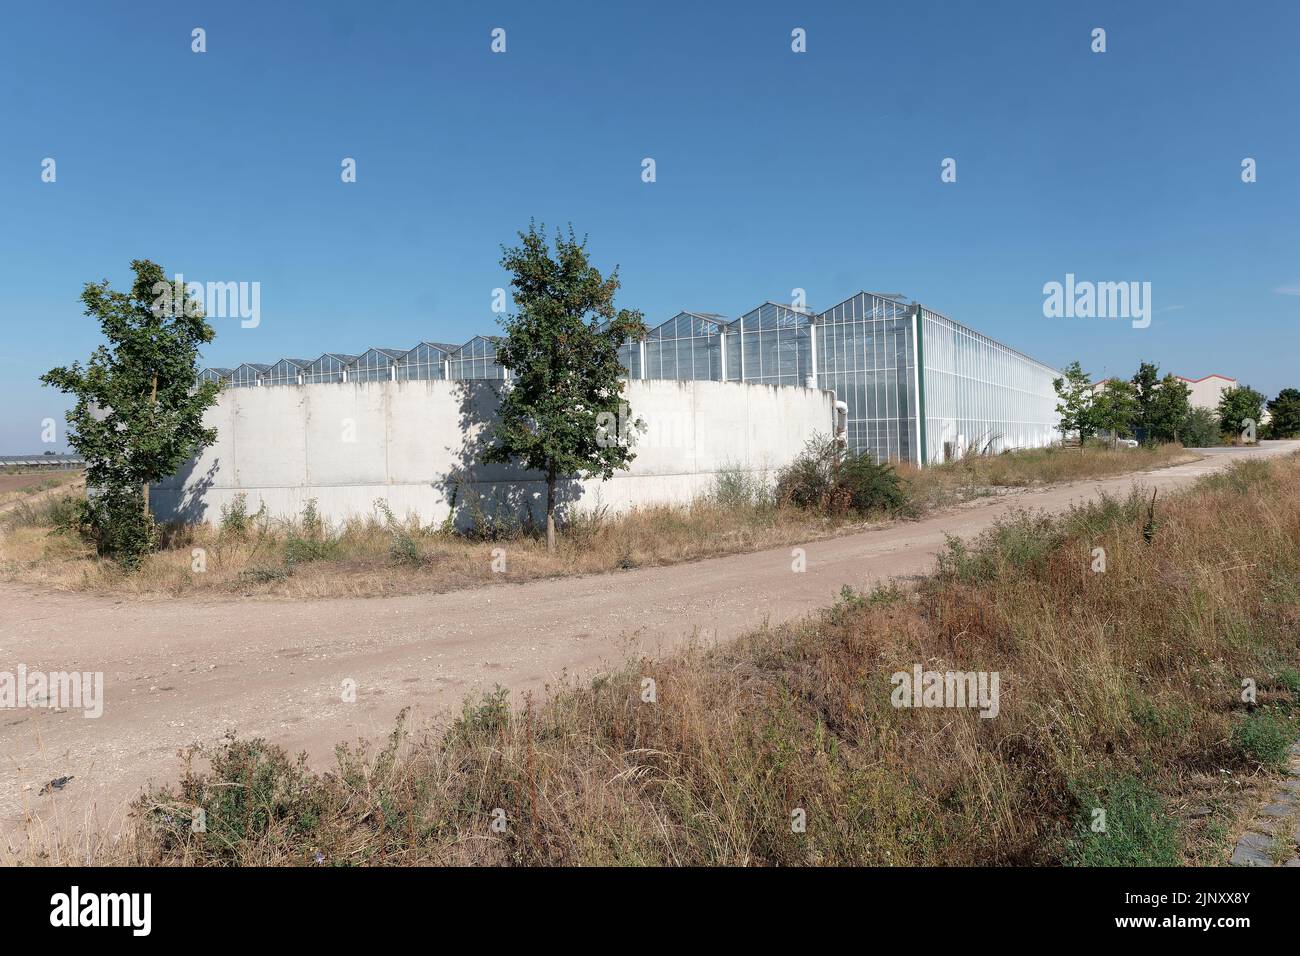 Food production in increasing heat and drought: water cistern in front of a large commercial glass greenhouse Stock Photo